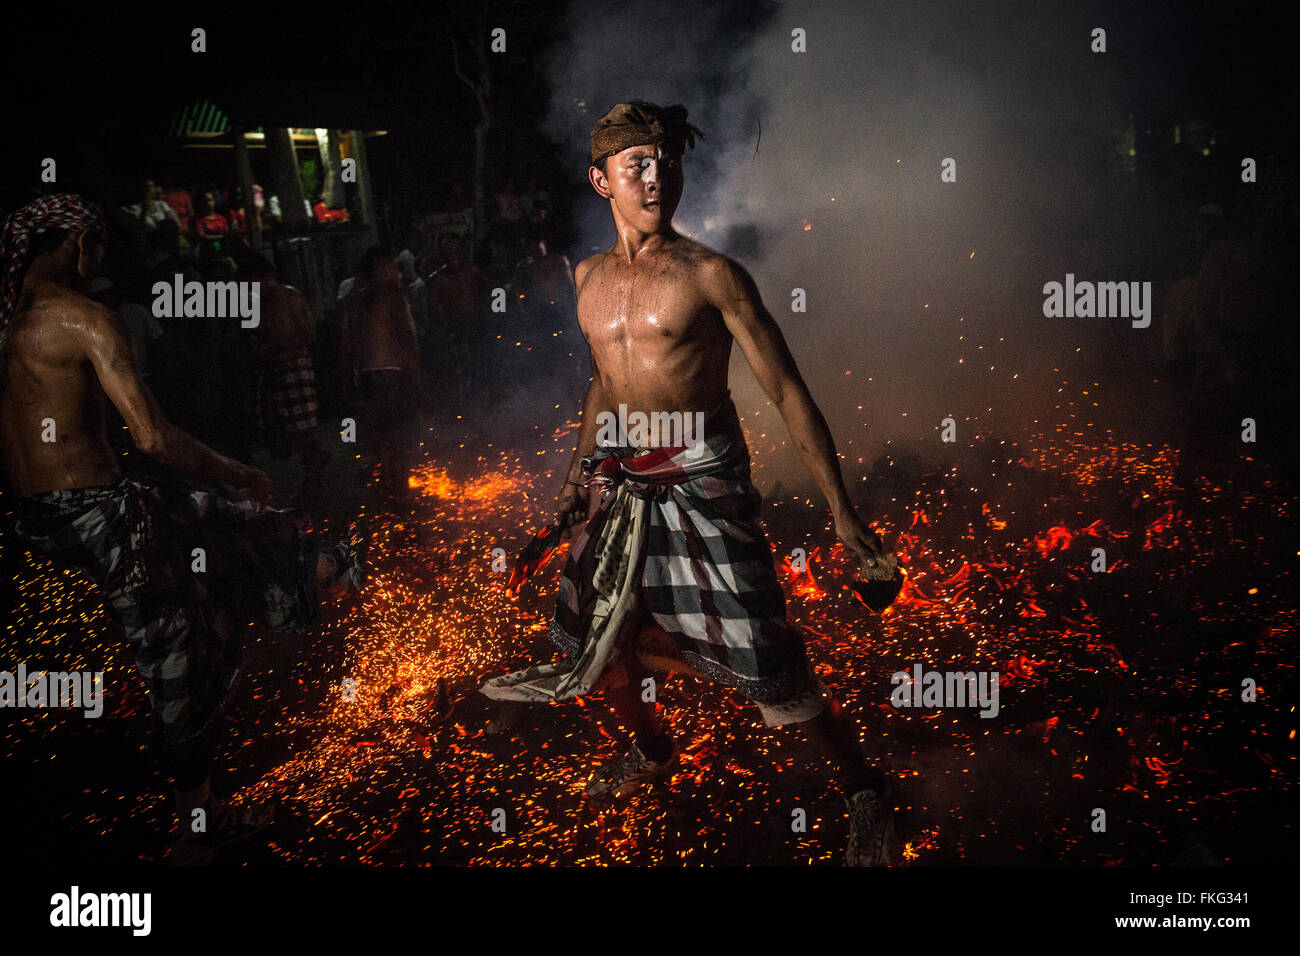 Bali, Indonesia. 08th Mar, 2016. A Balinese man gestures as he hold burned coconut husks during the 'Mesabatan Api' ritual a head of Nyepi Day on March, 2016 at Banjar Nagi in Gianyar, Bali, Indonesia. Mesabatan Api is held annually a day before the Nyepi Day of Silence, as symbolizes the purification of universe and human body trough fire. Nyepi is a Hindu celebration observed every new year according to the Balinese calendar. Credit:  Agung Parameswara/Alamy Live News Stock Photo